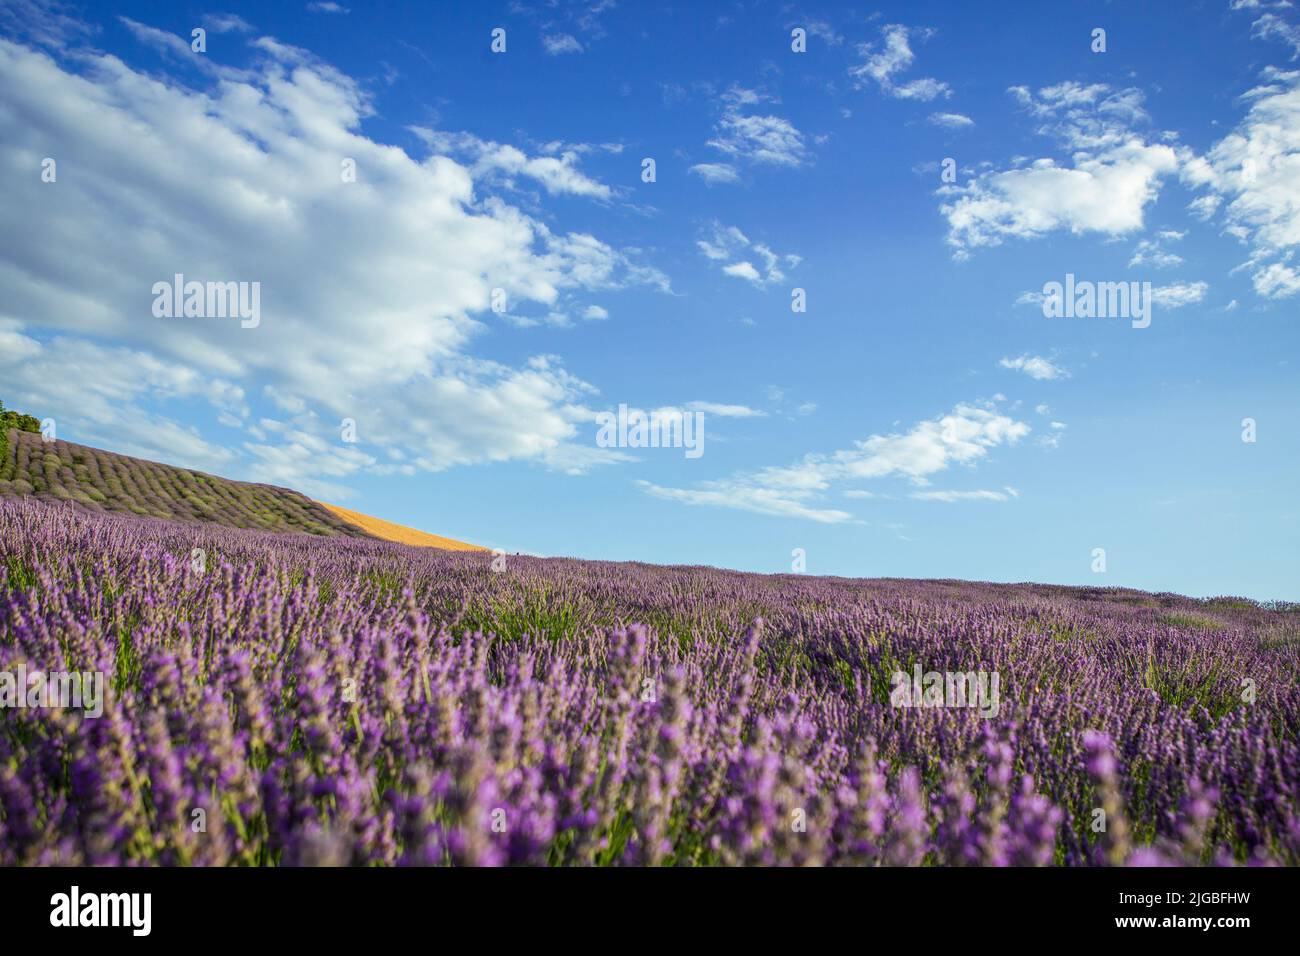 beautiful Lavender flower blooming fields in endless rows. Stock Photo